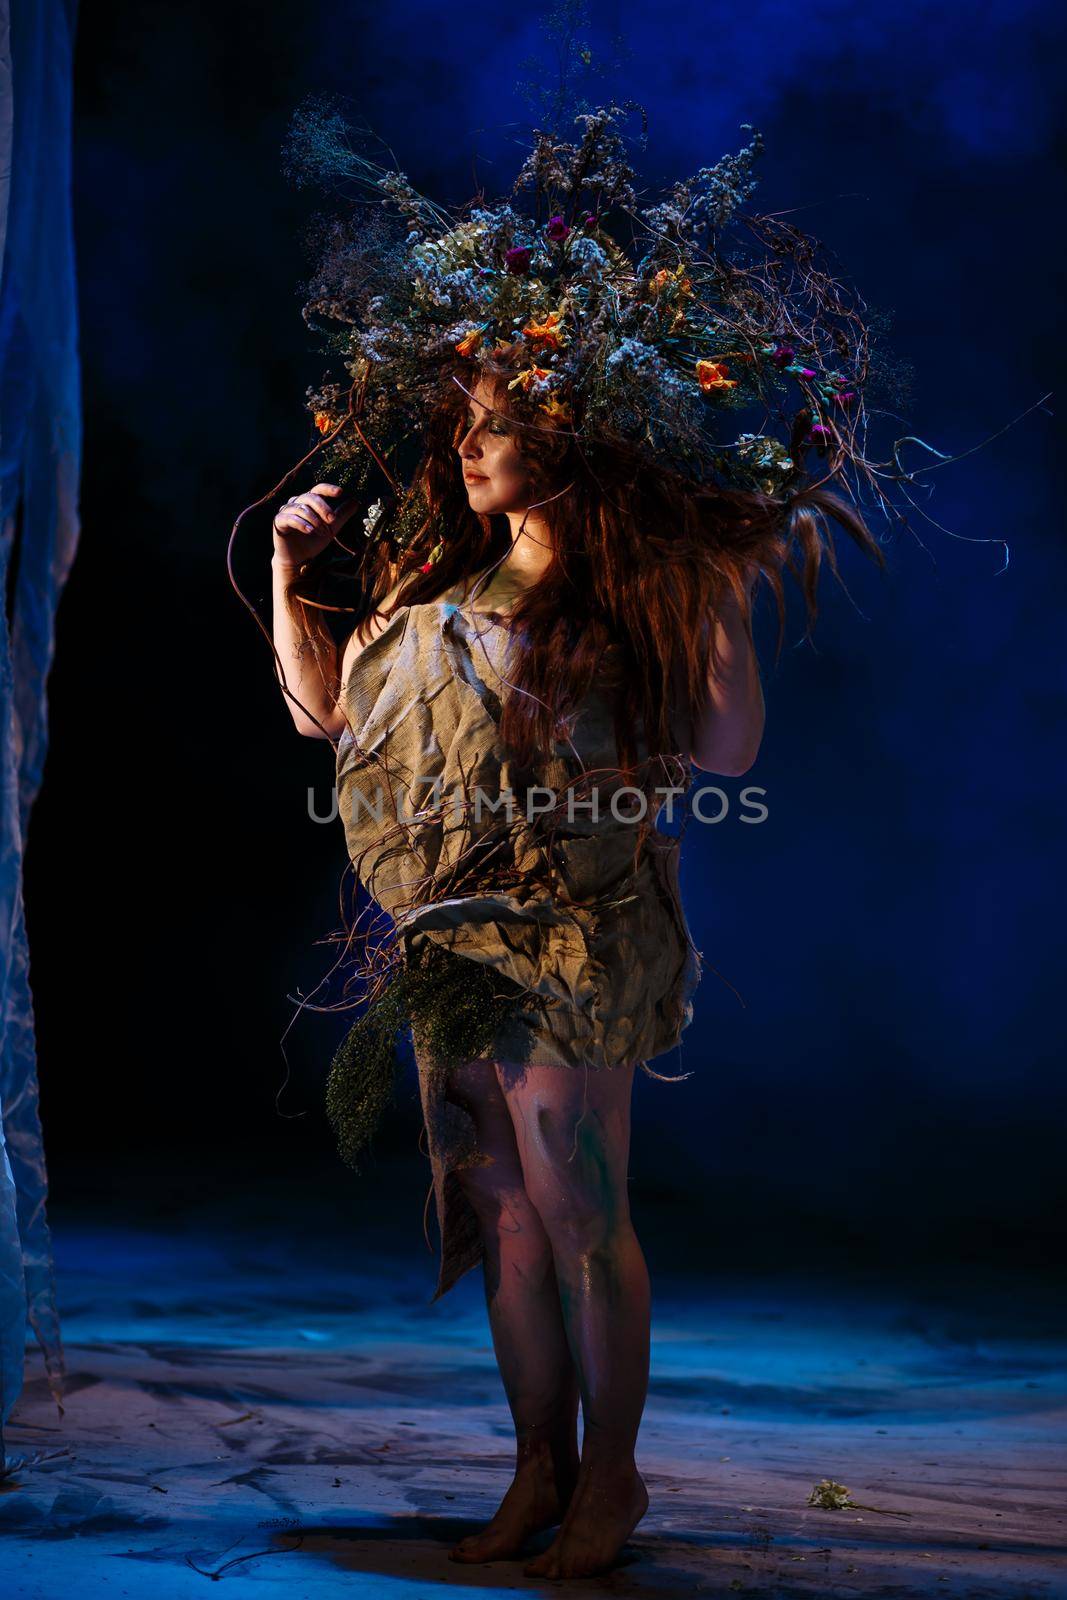 Dryad, Muse from the forest, standing in blue light and smoke by deandy